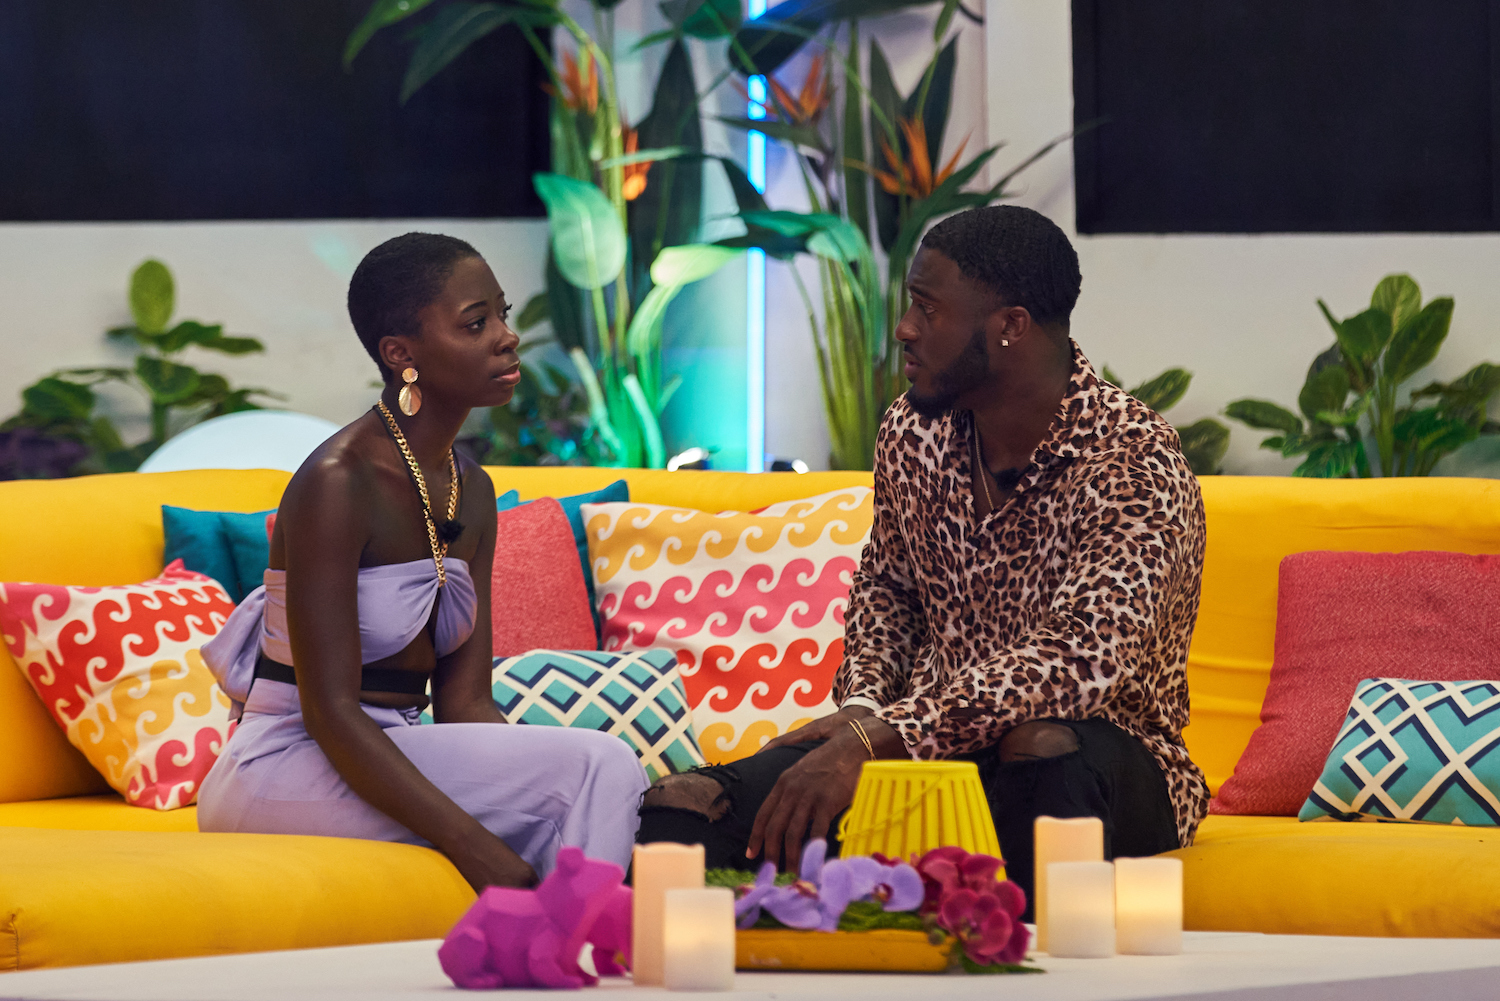 Cashay Proudfoot and Melvin 'Cinco' Holland Jr., 'The Challenge: USA' cast members, speaking on 'Love Island USA'